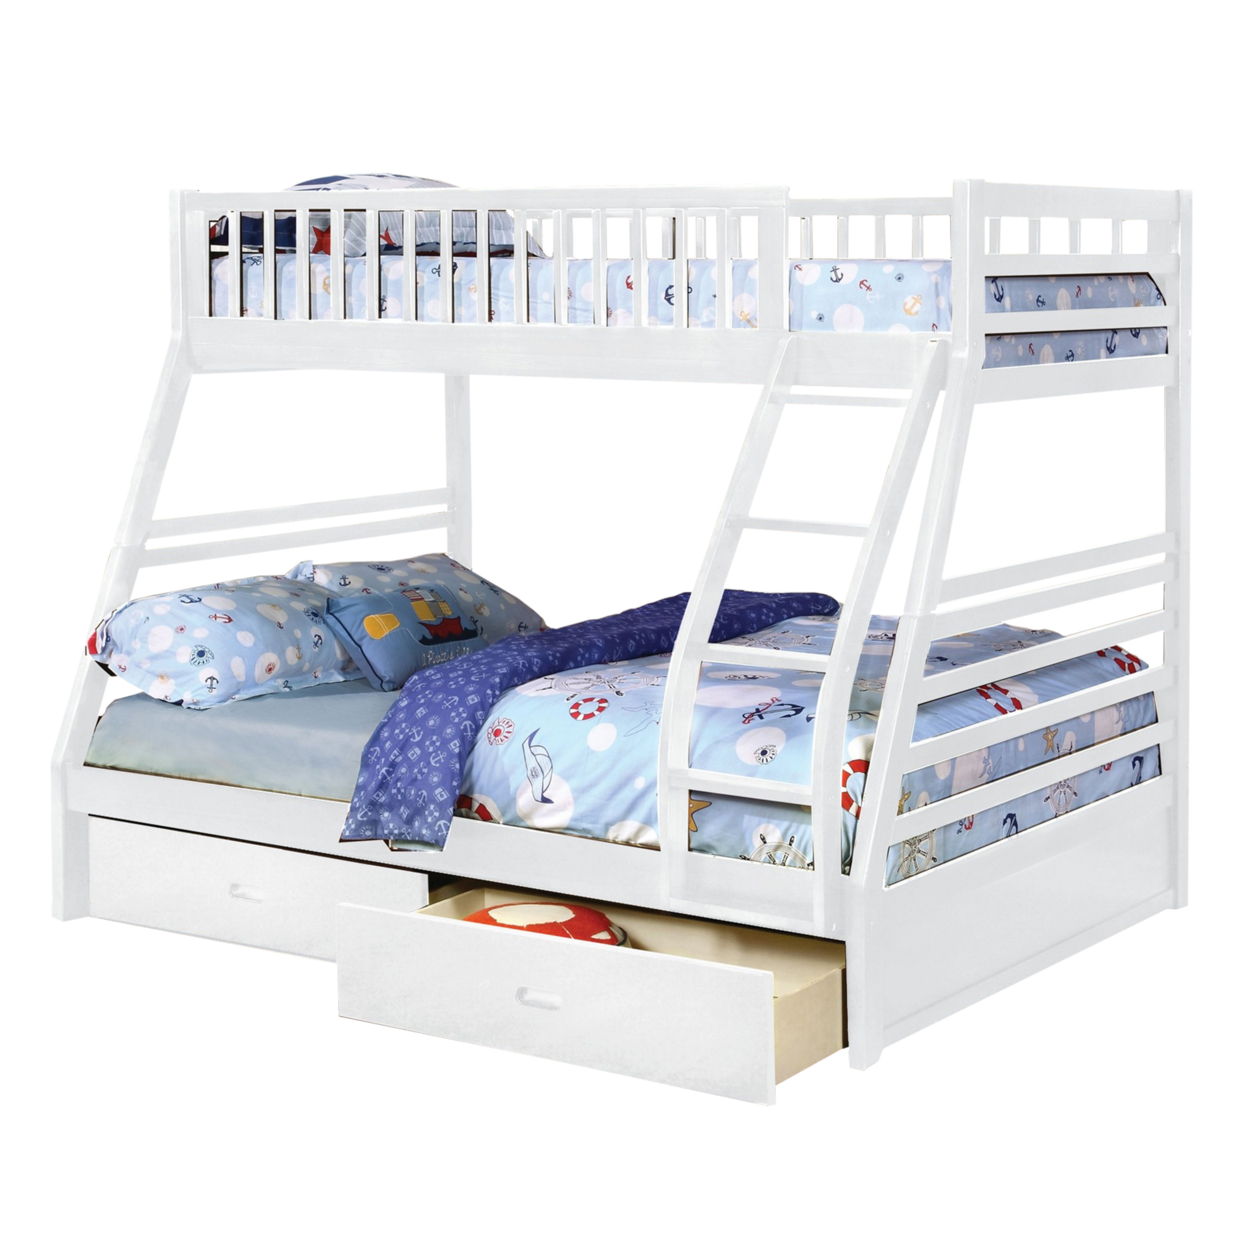 Wooden Twin Over Full Bunk Bed With 2 Drawers And Casters, White- Saltoro Sherpi